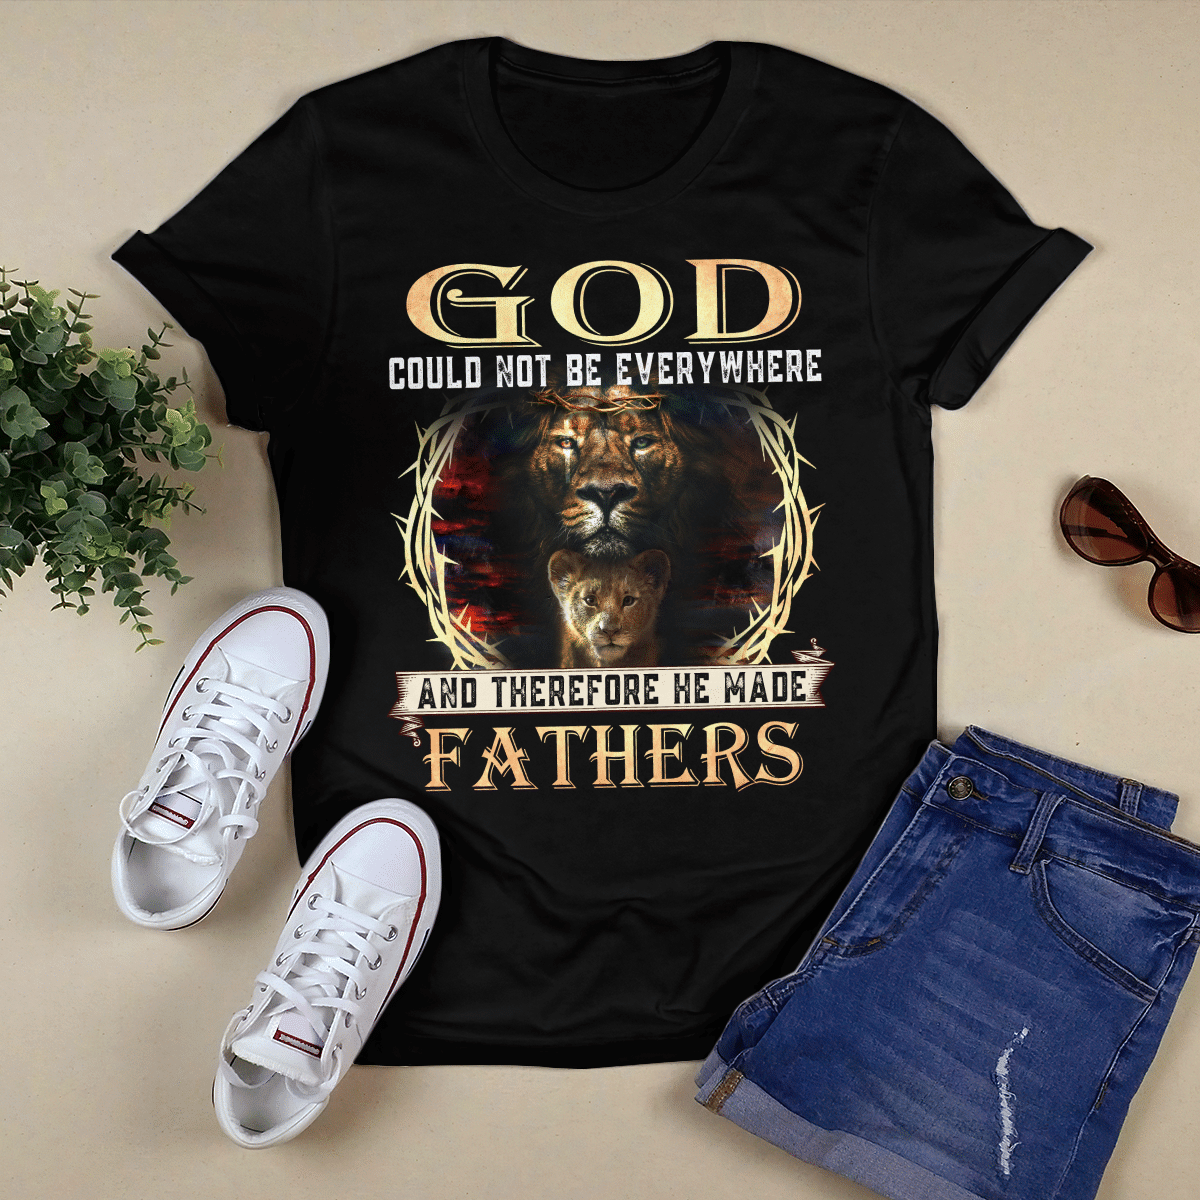 Lion - God Could Not Be Everywhere And Therefore He Made Fathers T- Shirt - Jesus T-Shirt - Christian Shirts For Men & Women - Ciaocustom